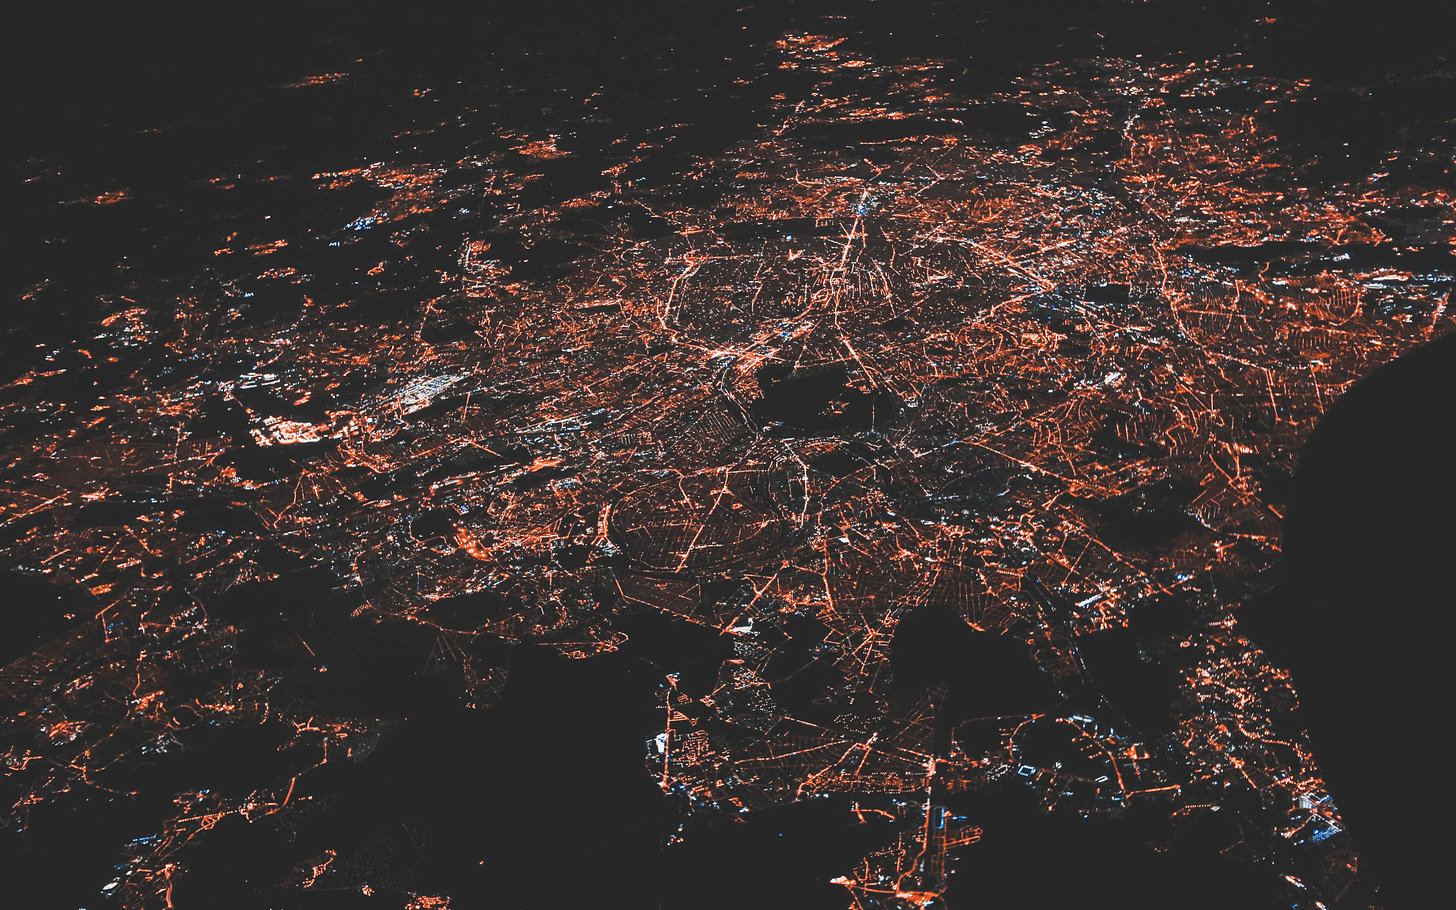 An aerial view of a city at nighttime. Orange lights punctuate a black background.